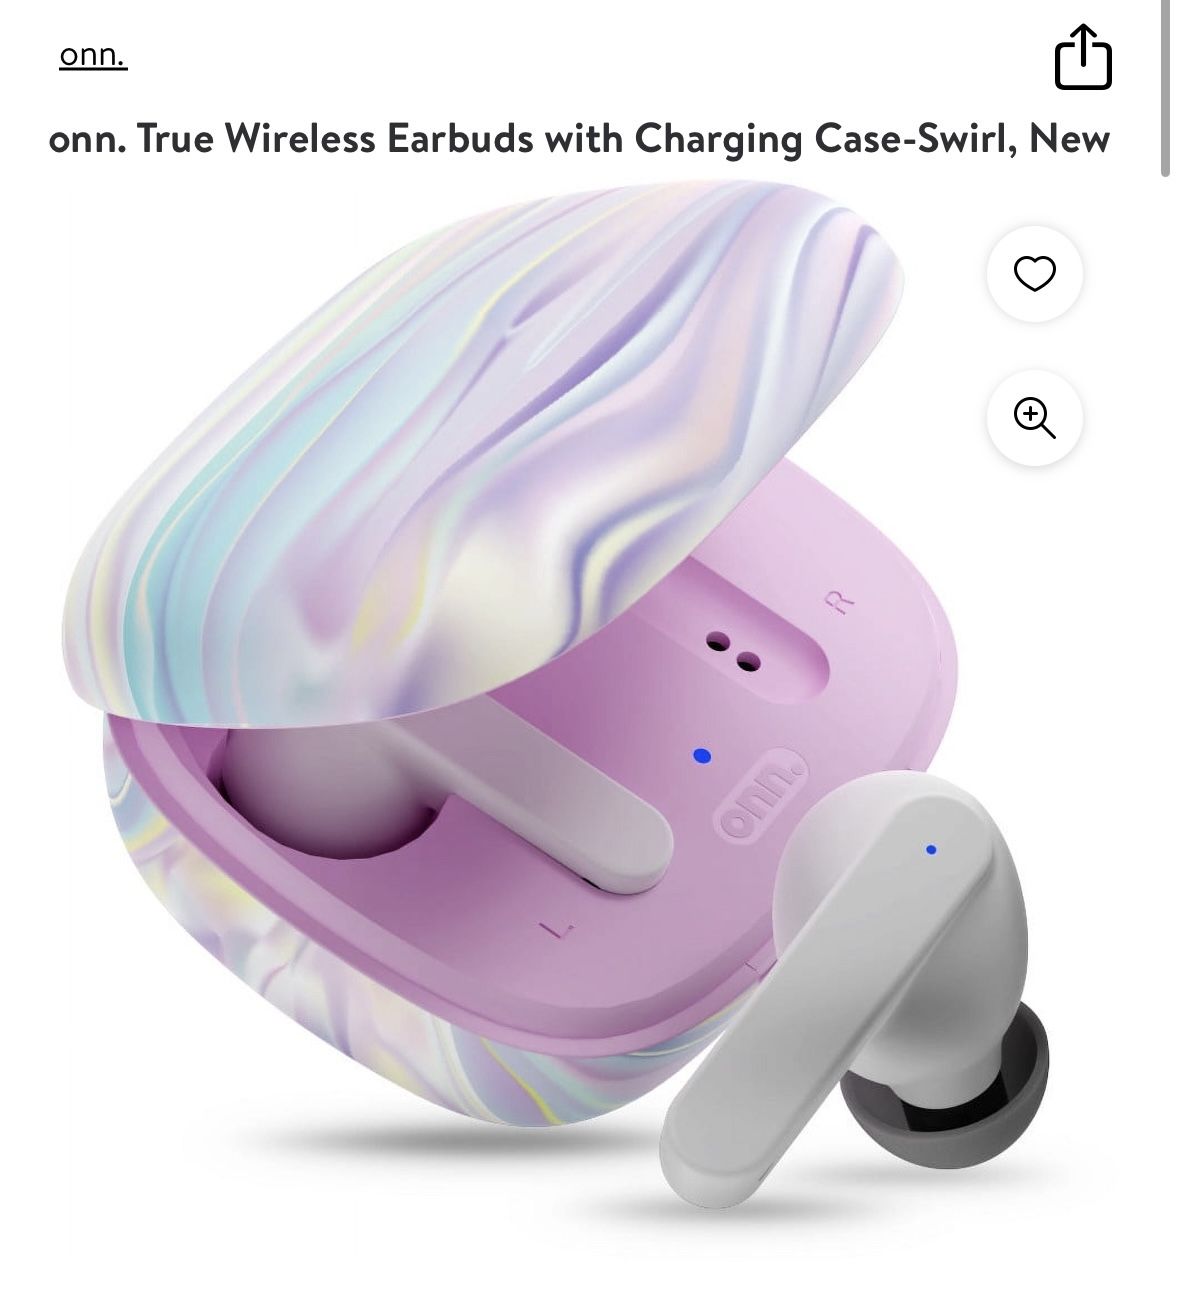 Onn Wireless Earbuds with Charging Case- Swirl